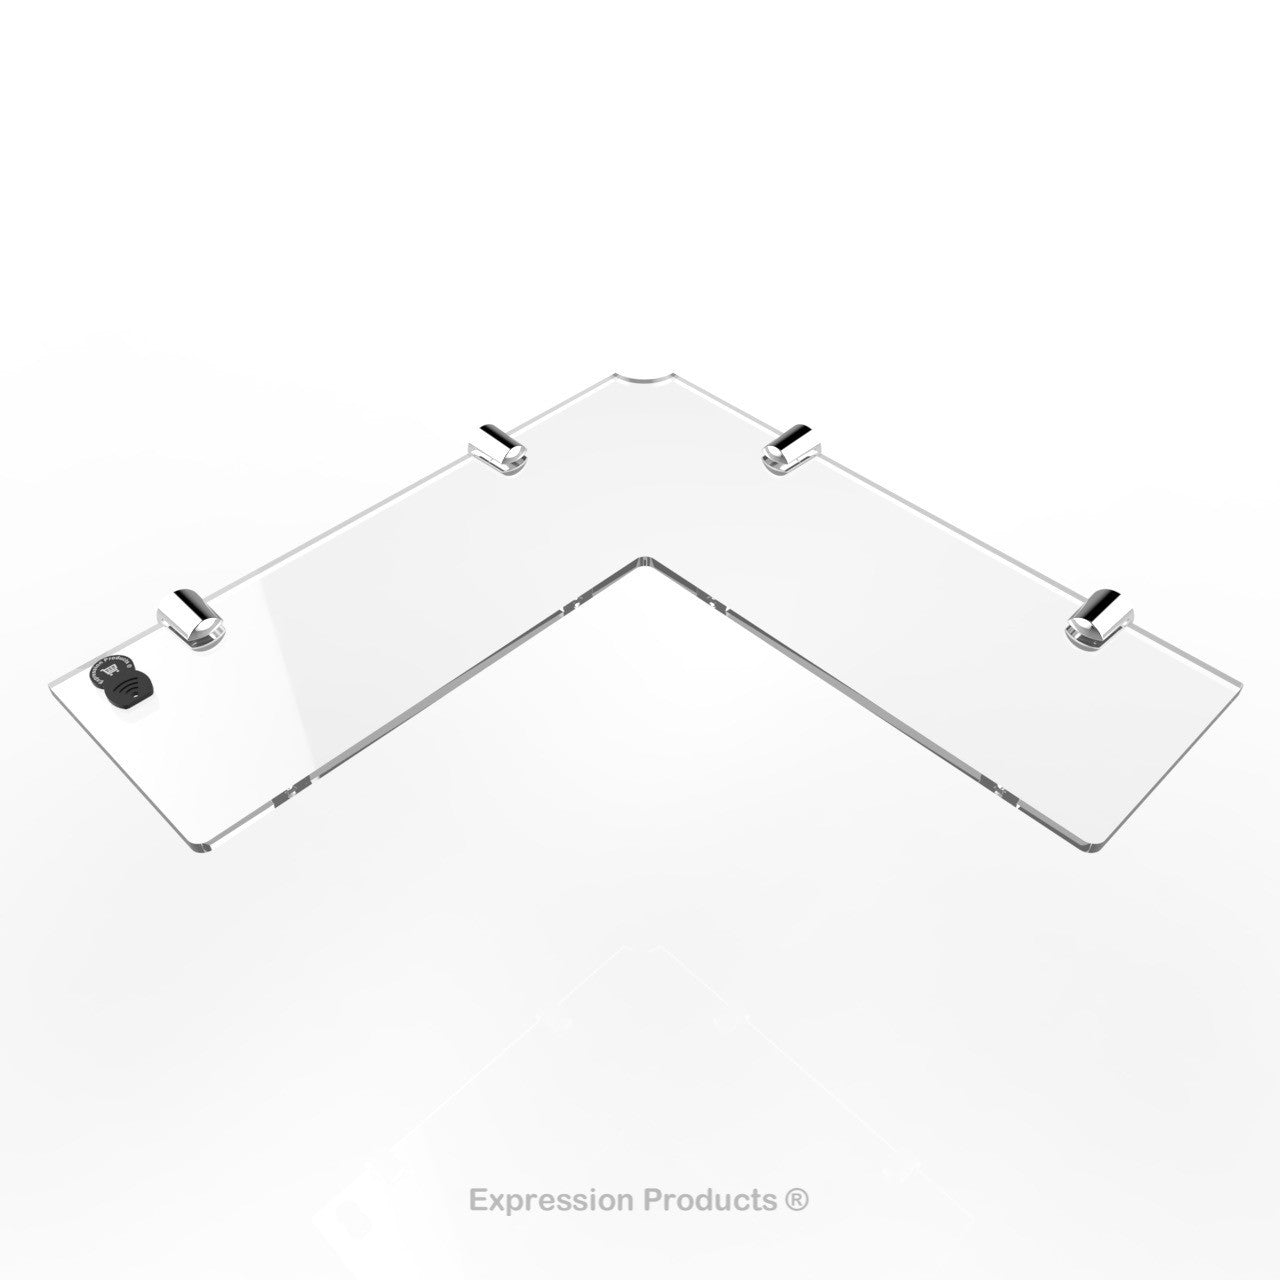 Corner Acrylic Shelf With Cable Feed Through - Style 003 - Expression Products Ltd